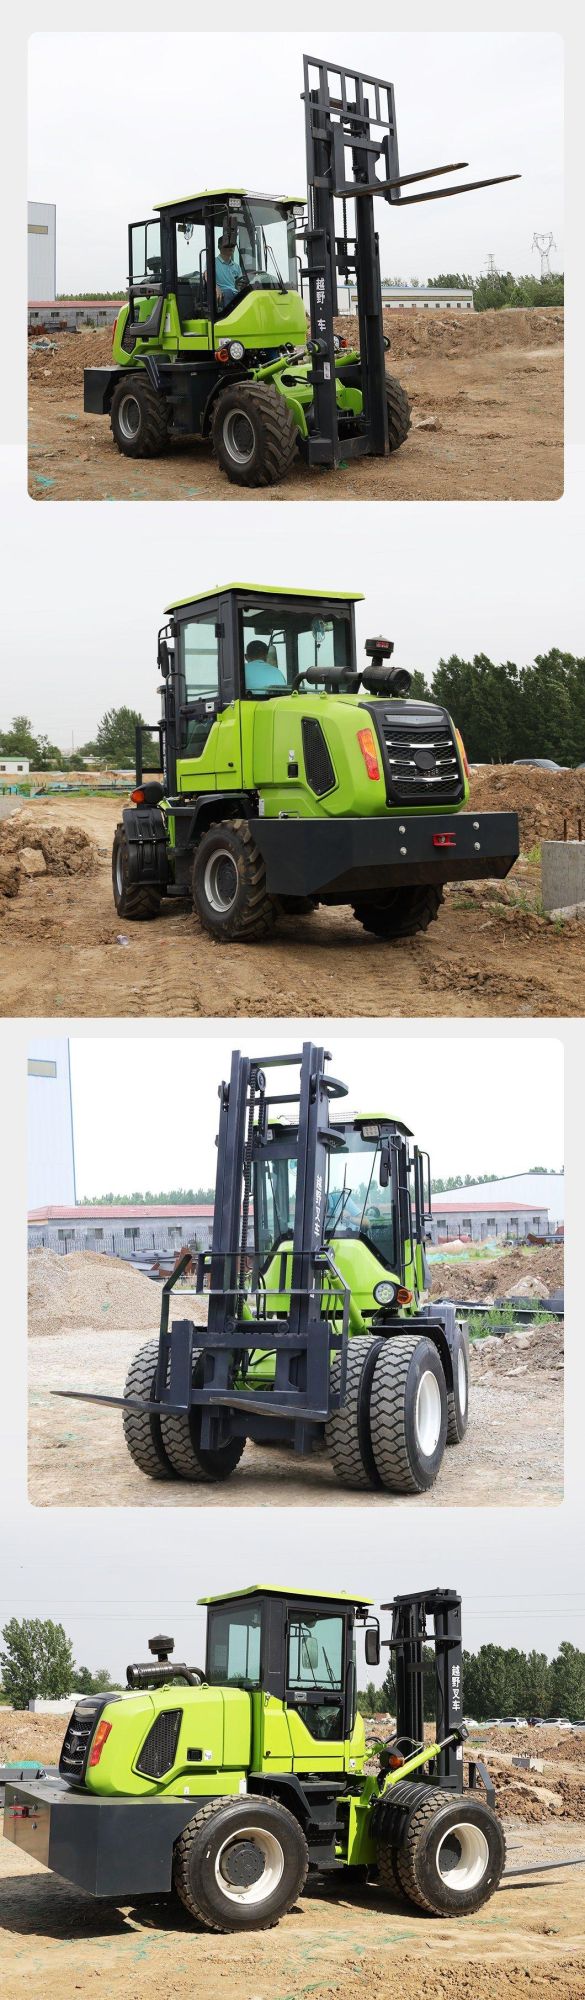 4 Wheel Drive Hydraulic Drive Cross Country Rough Terrain off Road Forklift Internal Combustion Counterbalanced Forklift